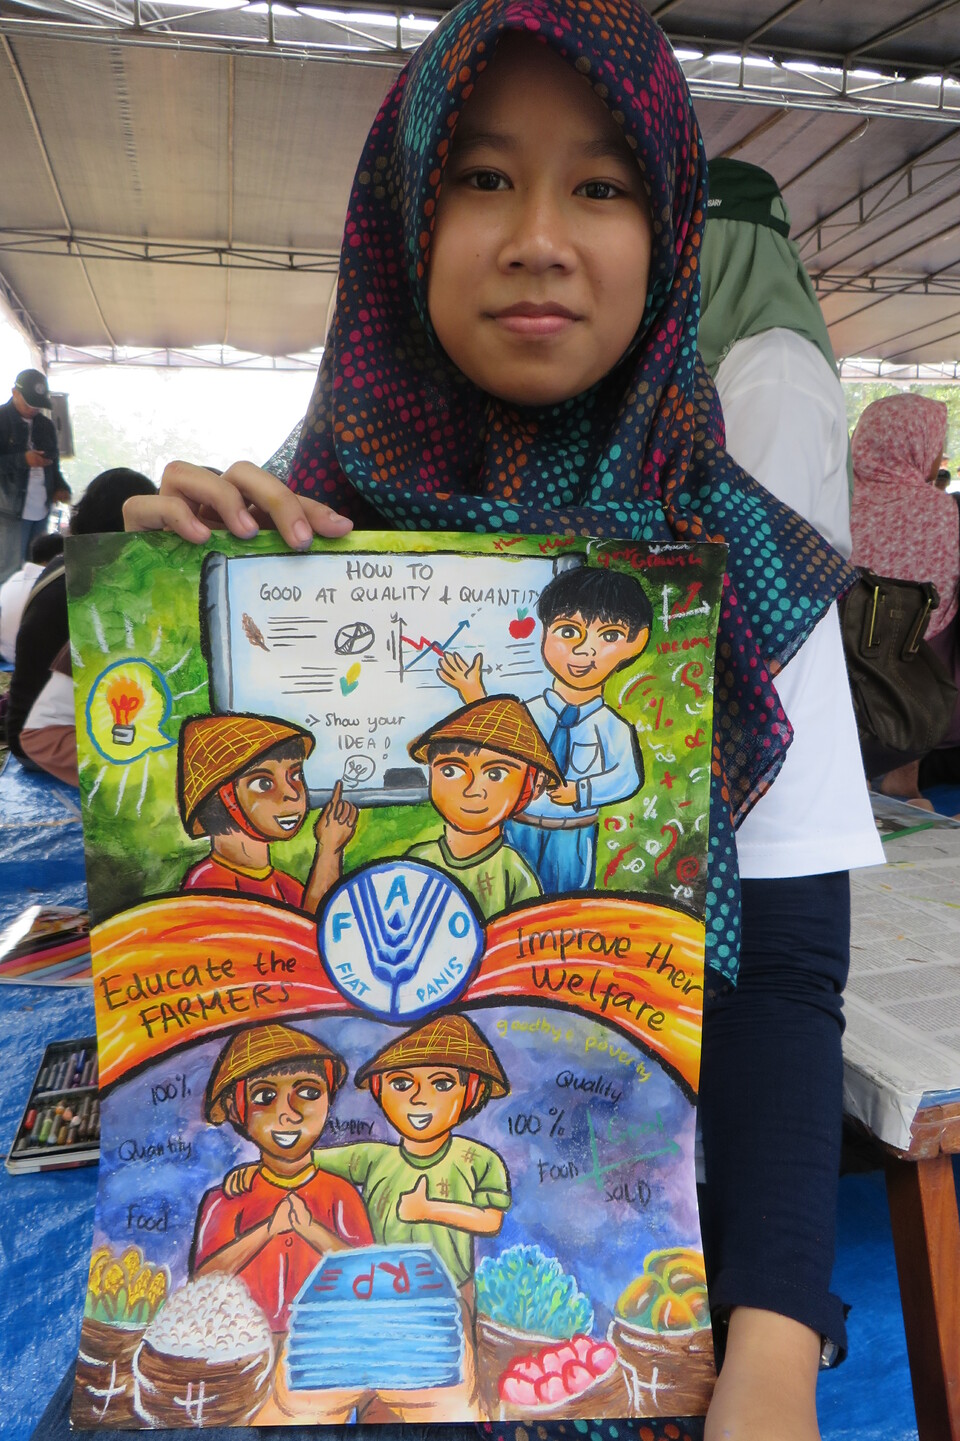 Alifia Zahratul Ilmi, a 14-year-old junior high school in Bogor, on Saturday partakes in a poster competition organized by the Food and Agriculture Organizations of the United Nations celebrating this year's World Food Day. (JG Photos/Basten Gokkon)